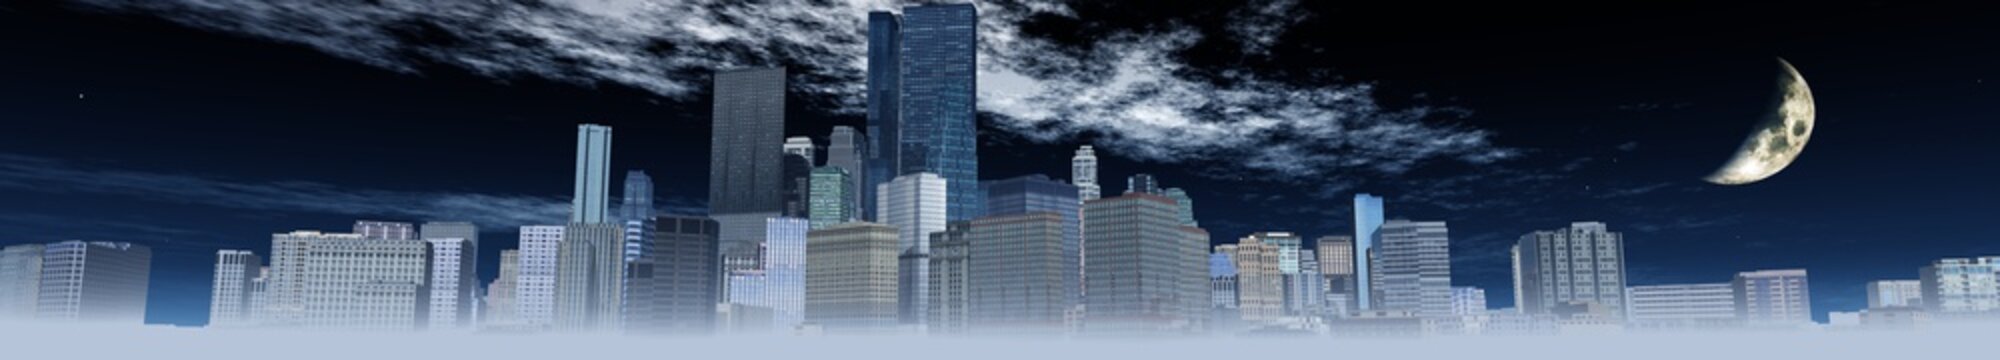 Panorama of the night city, illustration banner, 3D rendering